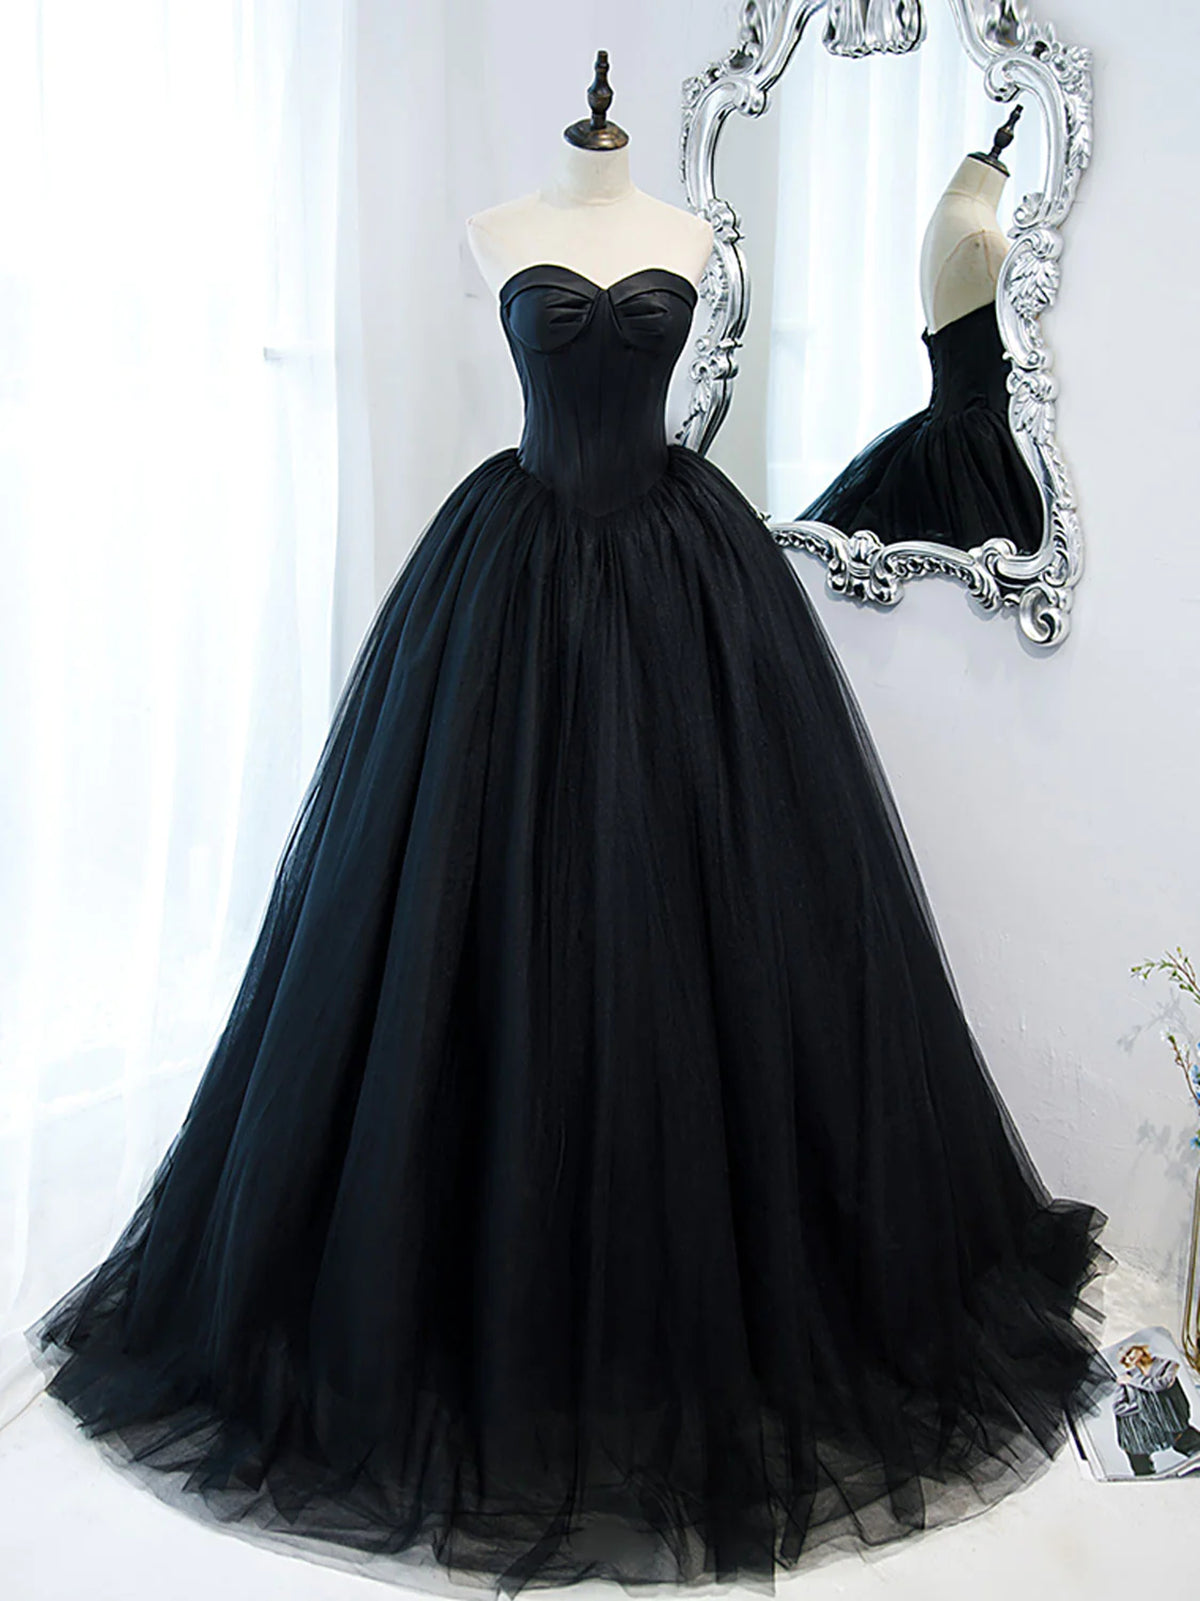 Country Wedding, Strapless Sweetheart Neck Black Tulle Prom Dresses, Black Tulle Formal Gowns